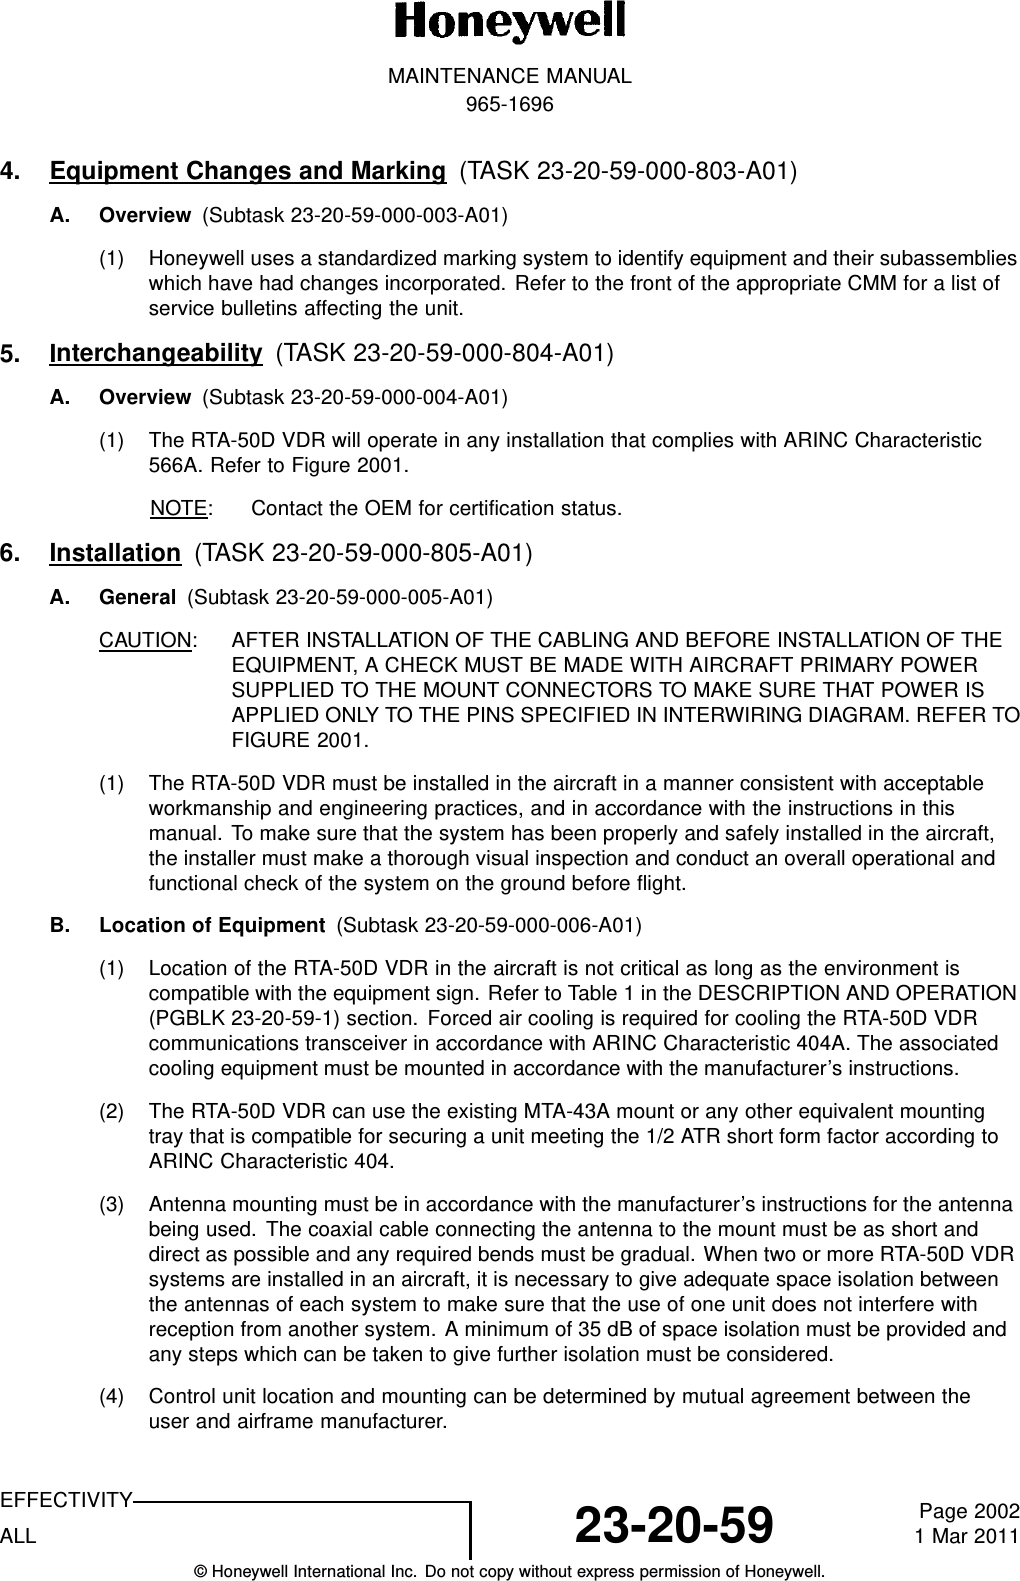 MAINTENANCE MANUAL965-16964. Equipment Changes and Marking (TASK 23-20-59-000-803-A01)A. Overview (Subtask 23-20-59-000-003-A01)(1) Honeywell uses a standardized marking system to identify equipment and their subassemblieswhich have had changes incorporated. Refer to the front of the appropriate CMM for a list ofservice bulletins affecting the unit.5. Interchangeability (TASK 23-20-59-000-804-A01)A. Overview (Subtask 23-20-59-000-004-A01)(1) The RTA-50D VDR will operate in any installation that complies with ARINC Characteristic566A. Refer to Figure 2001.NOTE: Contact the OEM for certification status.6. Installation (TASK 23-20-59-000-805-A01)A. General (Subtask 23-20-59-000-005-A01)CAUTION: AFTER INSTALLATION OF THE CABLING AND BEFORE INSTALLATION OF THEEQUIPMENT, A CHECK MUST BE MADE WITH AIRCRAFT PRIMARY POWERSUPPLIED TO THE MOUNT CONNECTORS TO MAKE SURE THAT POWER ISAPPLIED ONLY TO THE PINS SPECIFIED IN INTERWIRING DIAGRAM. REFER TOFIGURE 2001.(1) The RTA-50D VDR must be installed in the aircraft in a manner consistent with acceptableworkmanship and engineering practices, and in accordance with the instructions in thismanual. To make sure that the system has been properly and safely installed in the aircraft,the installer must make a thorough visual inspection and conduct an overall operational andfunctional check of the system on the ground before flight.B. Location of Equipment (Subtask 23-20-59-000-006-A01)(1) Location of the RTA-50D VDR in the aircraft is not critical as long as the environment iscompatible with the equipment sign. Refer to Table 1 in the DESCRIPTION AND OPERATION(PGBLK 23-20-59-1) section. Forced air cooling is required for cooling the RTA-50D VDRcommunications transceiver in accordance with ARINC Characteristic 404A. The associatedcooling equipment must be mounted in accordance with the manufacturer’s instructions.(2) The RTA-50D VDR can use the existing MTA-43A mount or any other equivalent mountingtray that is compatible for securing a unit meeting the 1/2 ATR short form factor according toARINC Characteristic 404.(3) Antenna mounting must be in accordance with the manufacturer’s instructions for the antennabeing used. The coaxial cable connecting the antenna to the mount must be as short anddirect as possible and any required bends must be gradual. When two or more RTA-50D VDRsystems are installed in an aircraft, it is necessary to give adequate space isolation betweenthe antennas of each system to make sure that the use of one unit does not interfere withreception from another system. A minimum of 35 dB of space isolation must be provided andany steps which can be taken to give further isolation must be considered.(4) Control unit location and mounting can be determined by mutual agreement between theuser and airframe manufacturer.EFFECTIVITYALL 23-20-59 Page 20021 Mar 2011© Honeywell International Inc. Do not copy without express permission of Honeywell.